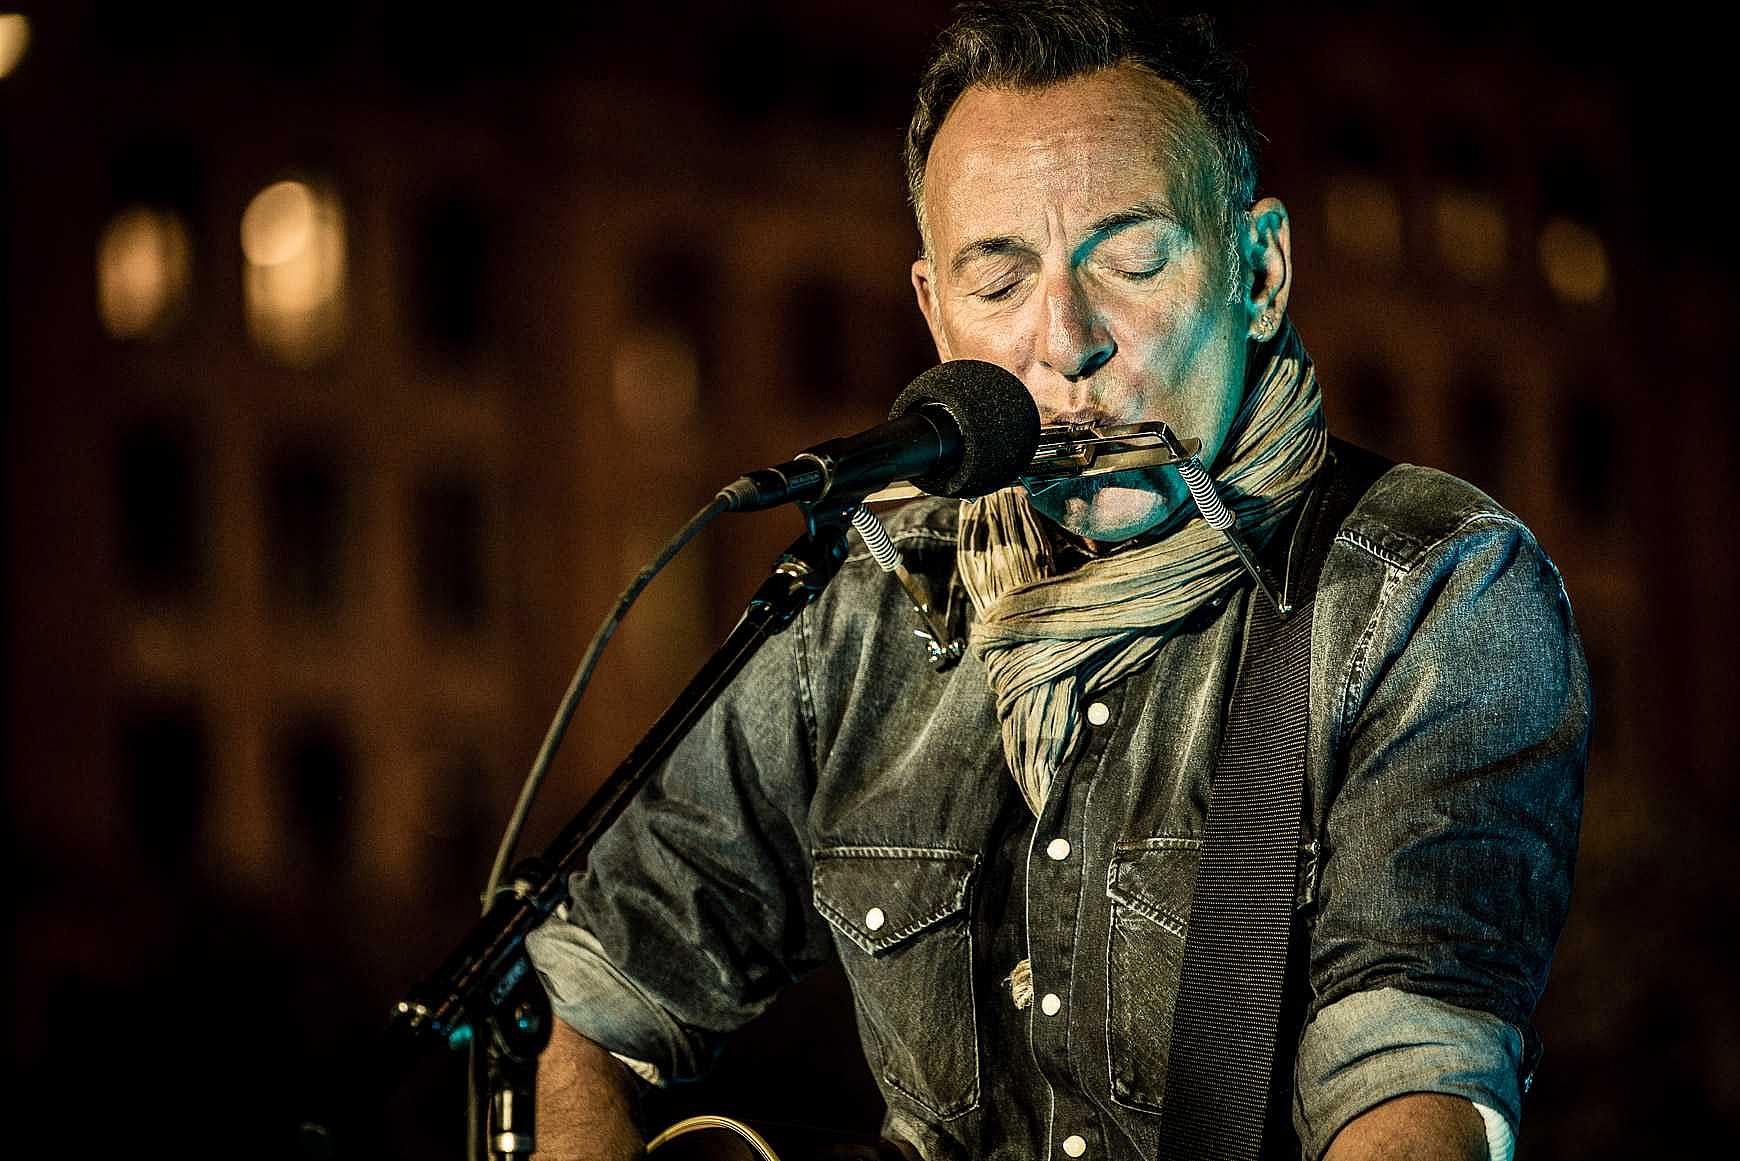 Bruce Springsteen play harmonica and guitar